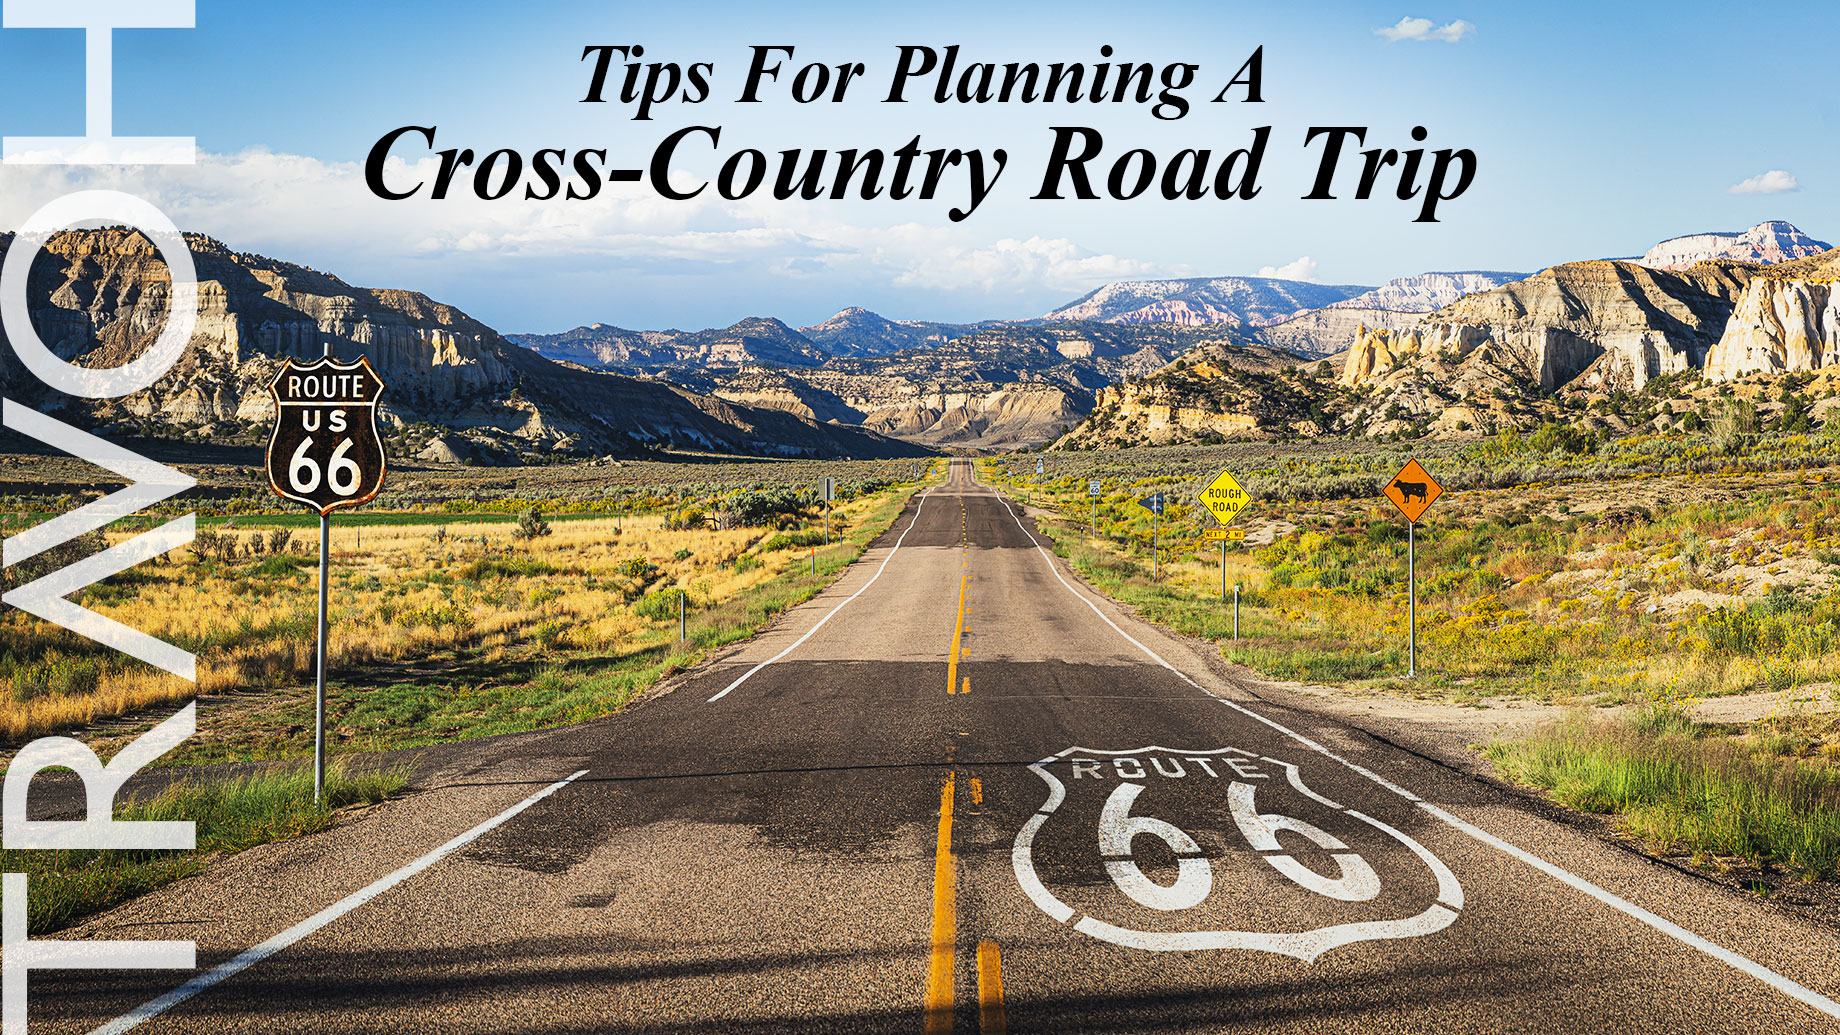 Tips For Planning A Cross-Country Road Trip